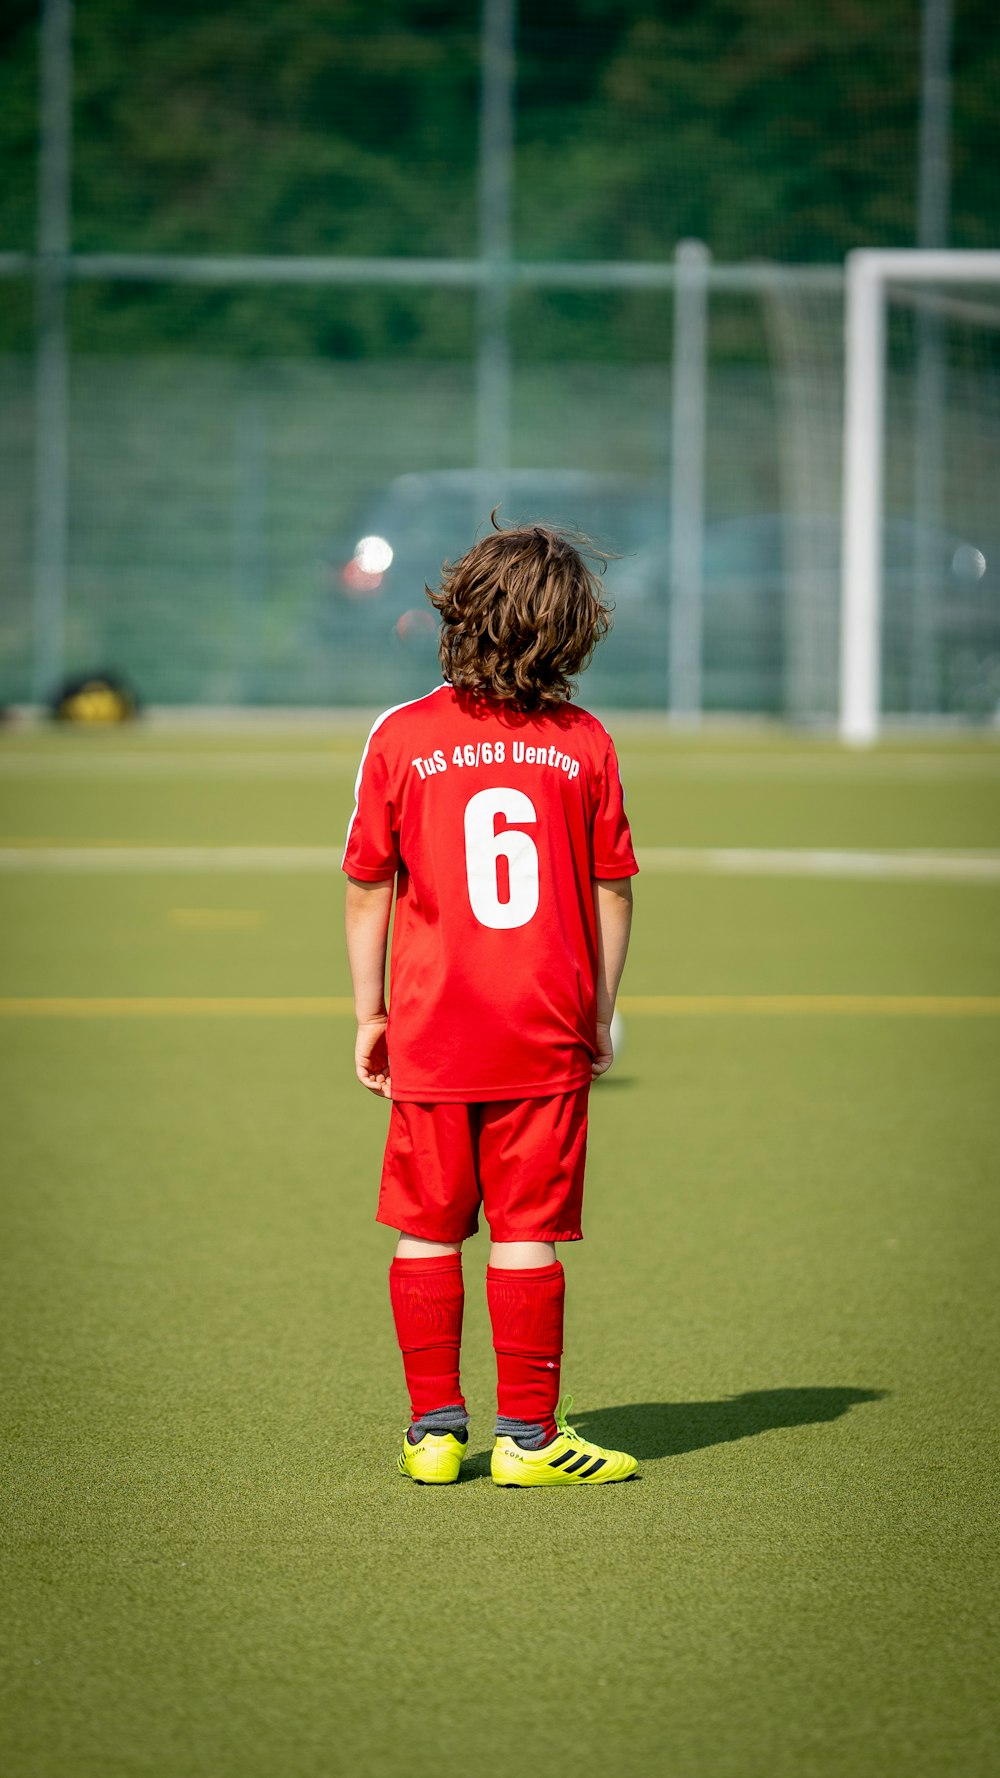 a young boy in a red uniform standing on a soccer field